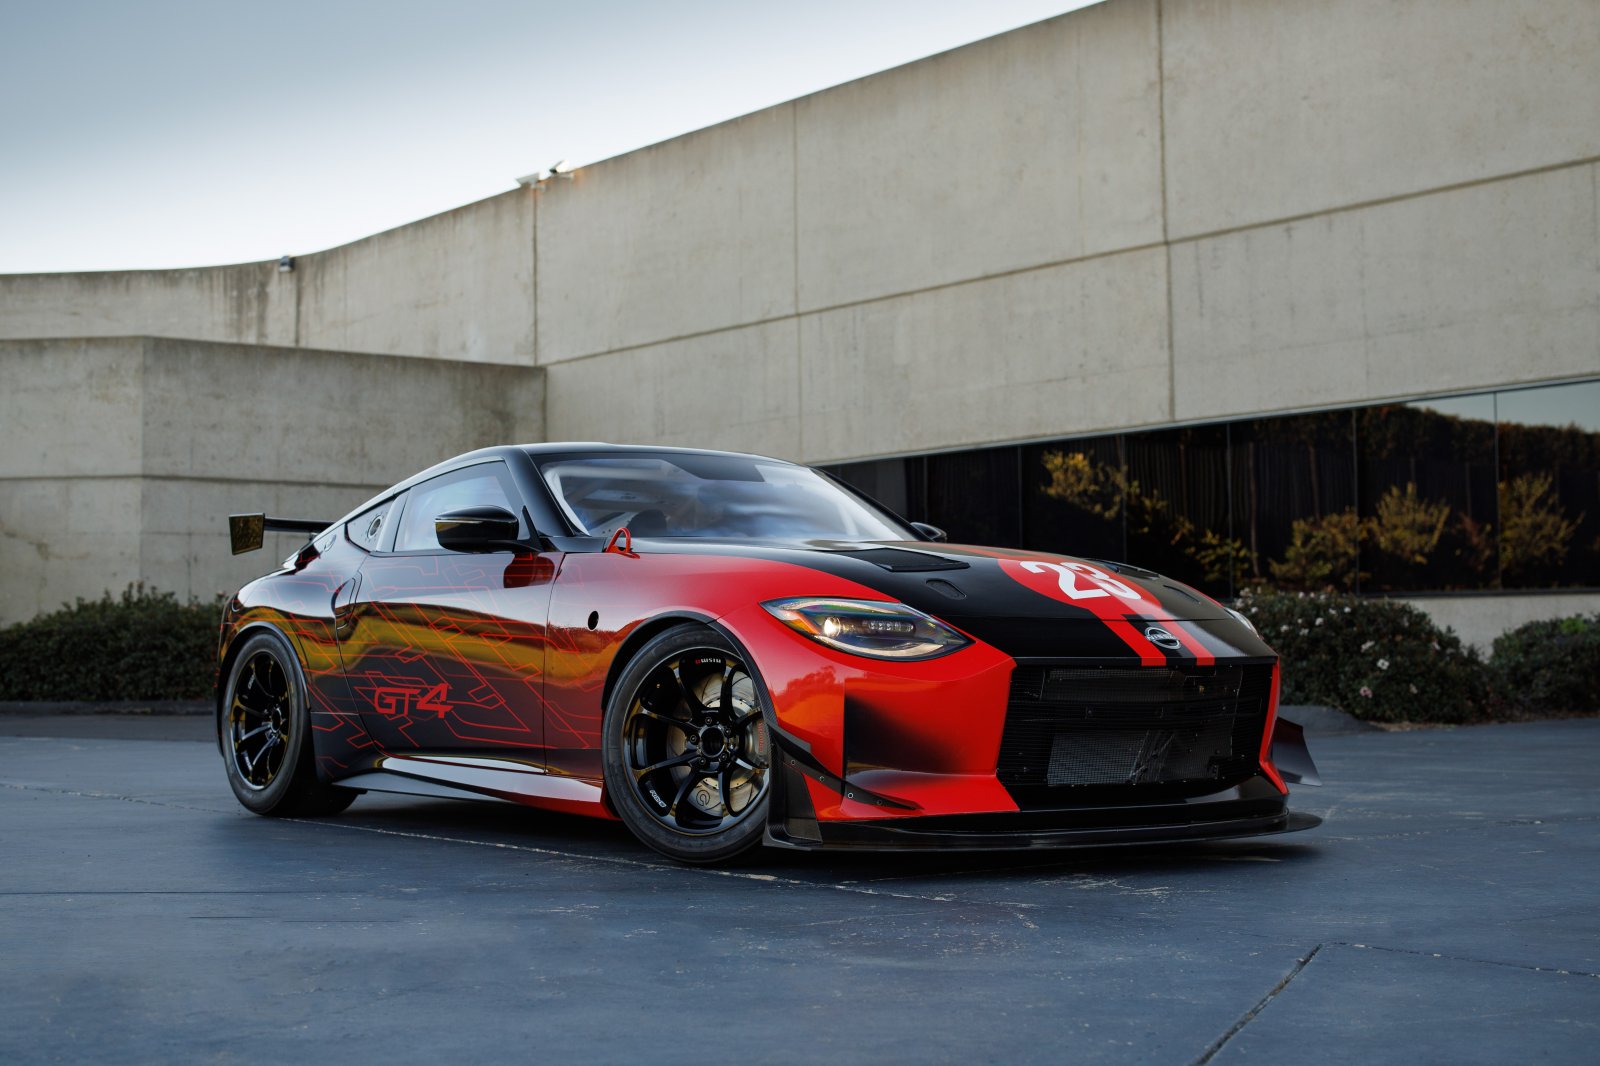 Nissan/NISMO unveils the Nissan Z GT4 at the 2022 SEMA Show